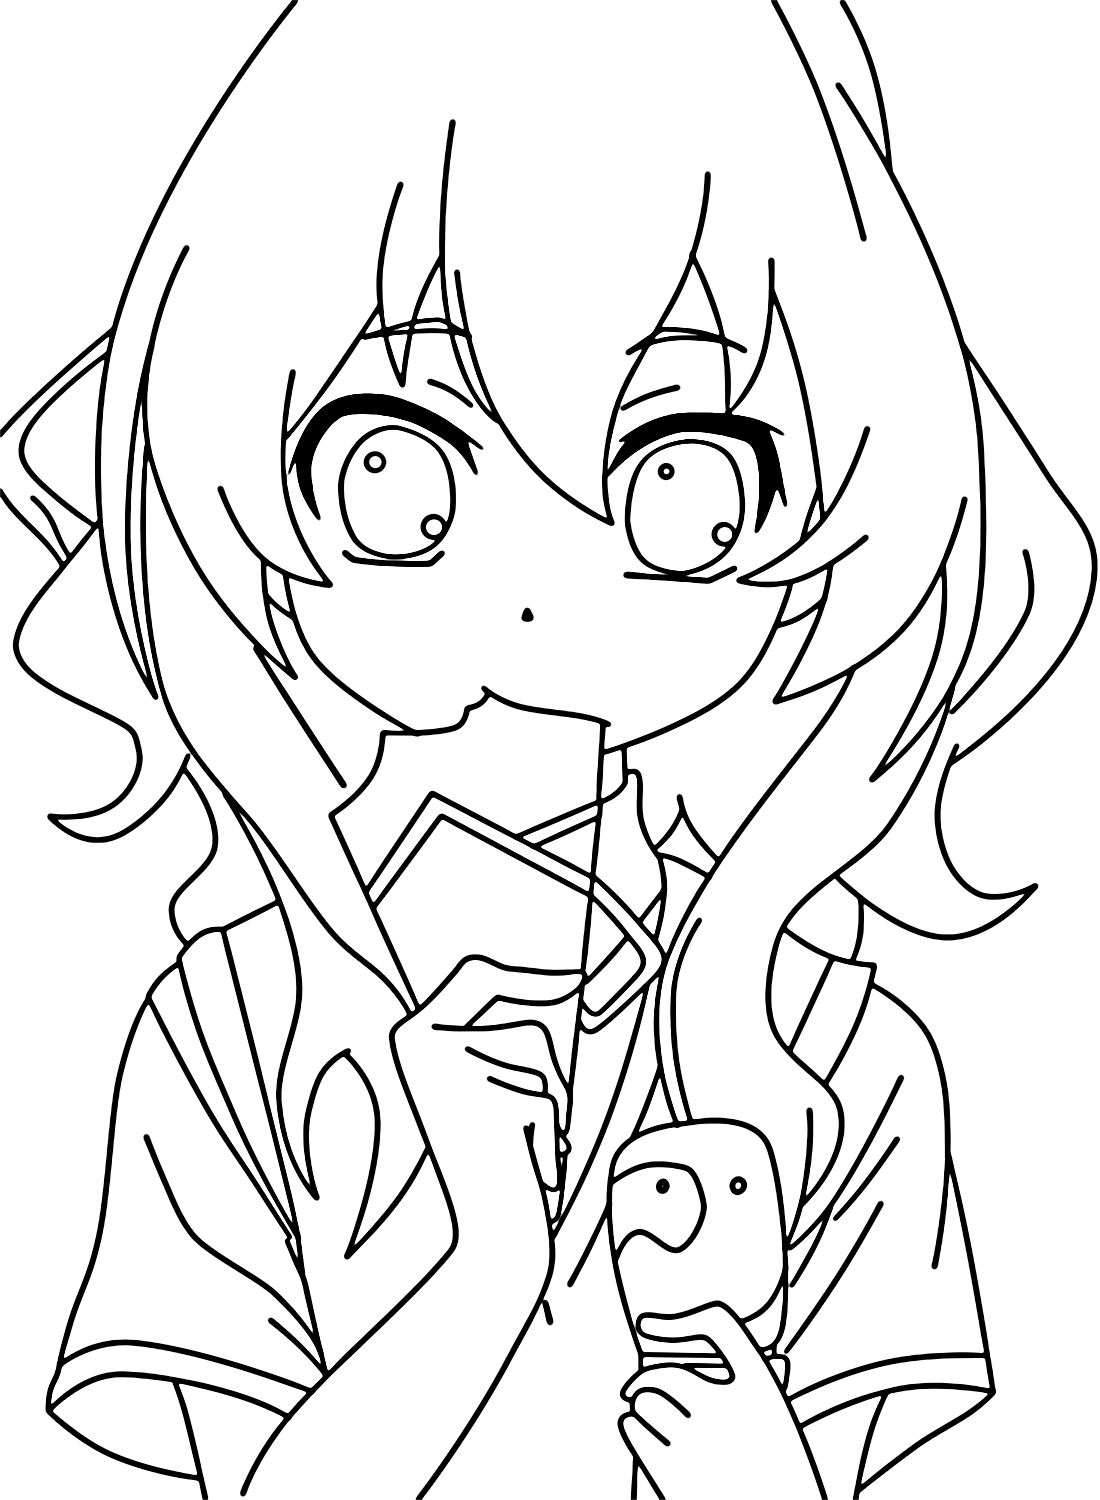 Taiga Aisaka Image to Color - Free Printable Coloring Pages